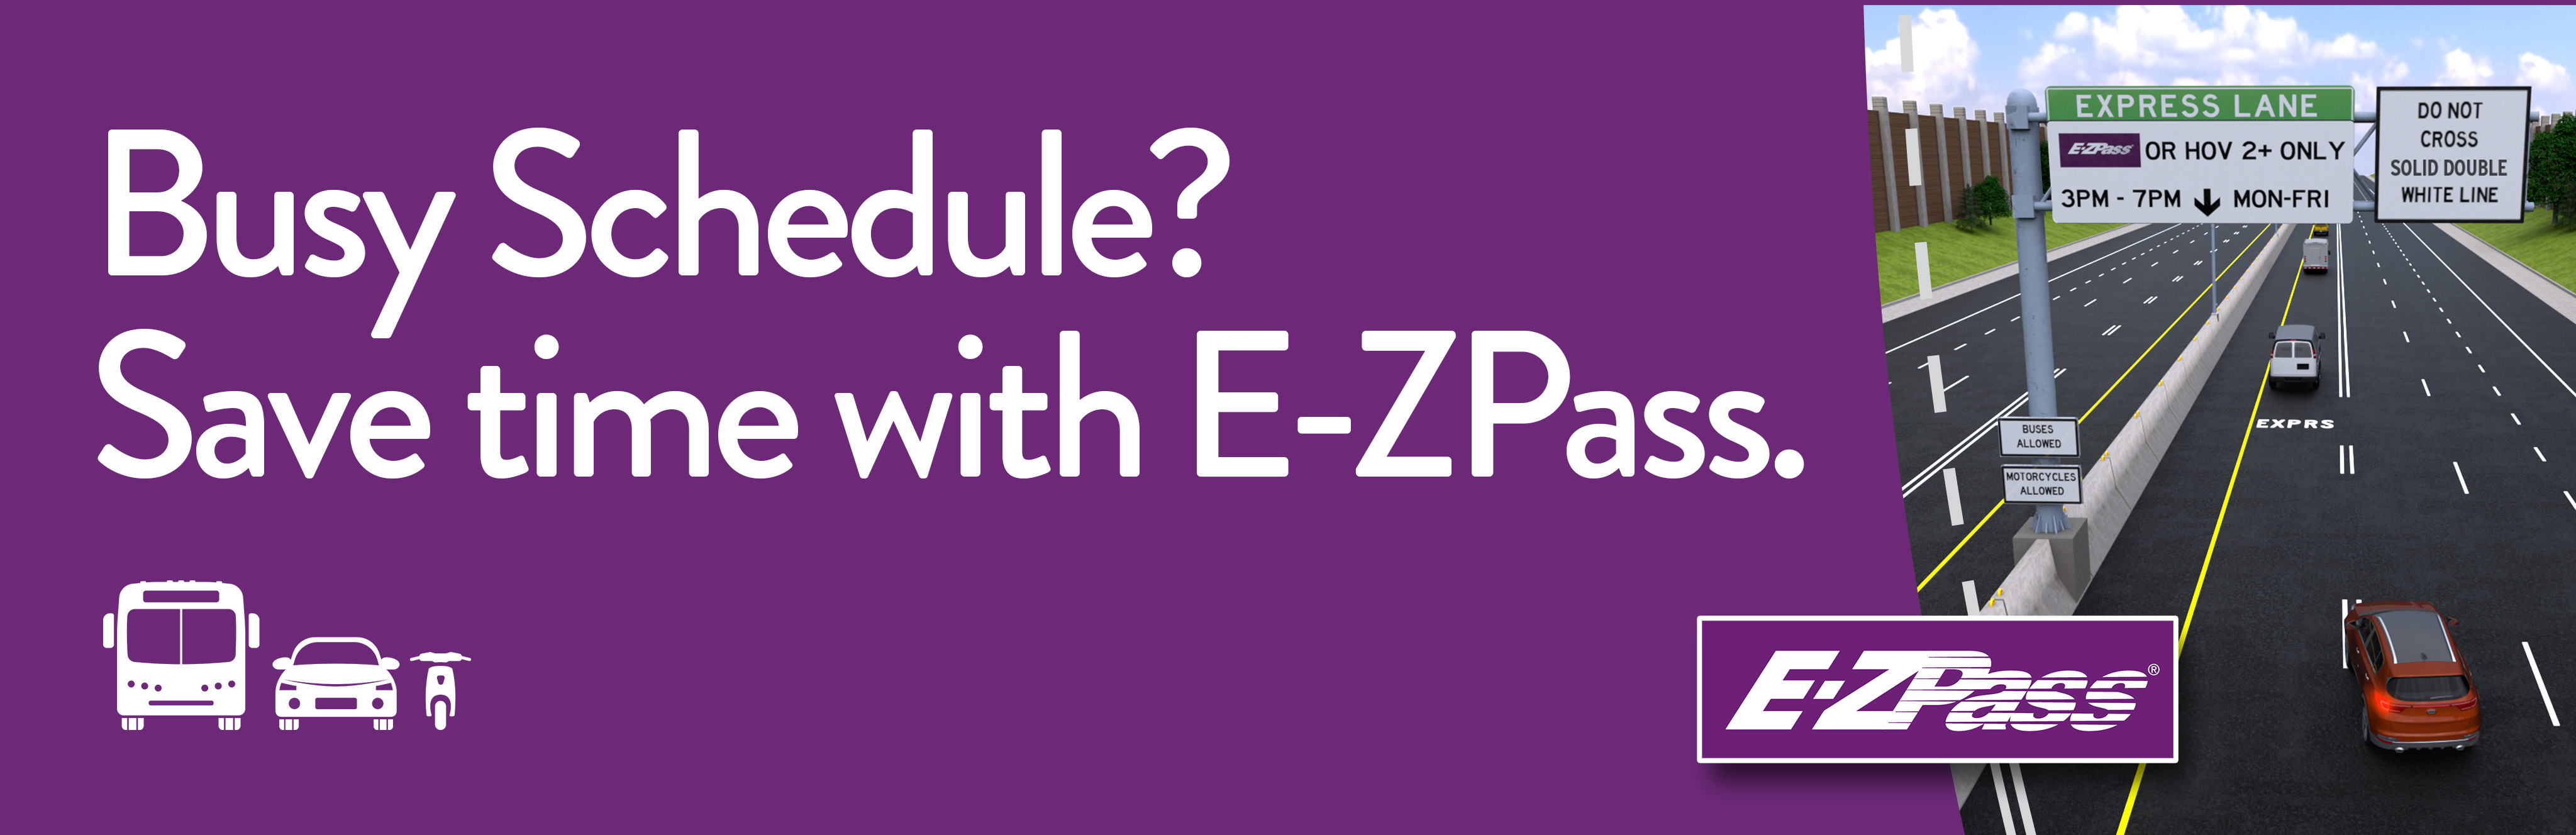 Busy schedule? Save time with E-ZPass.